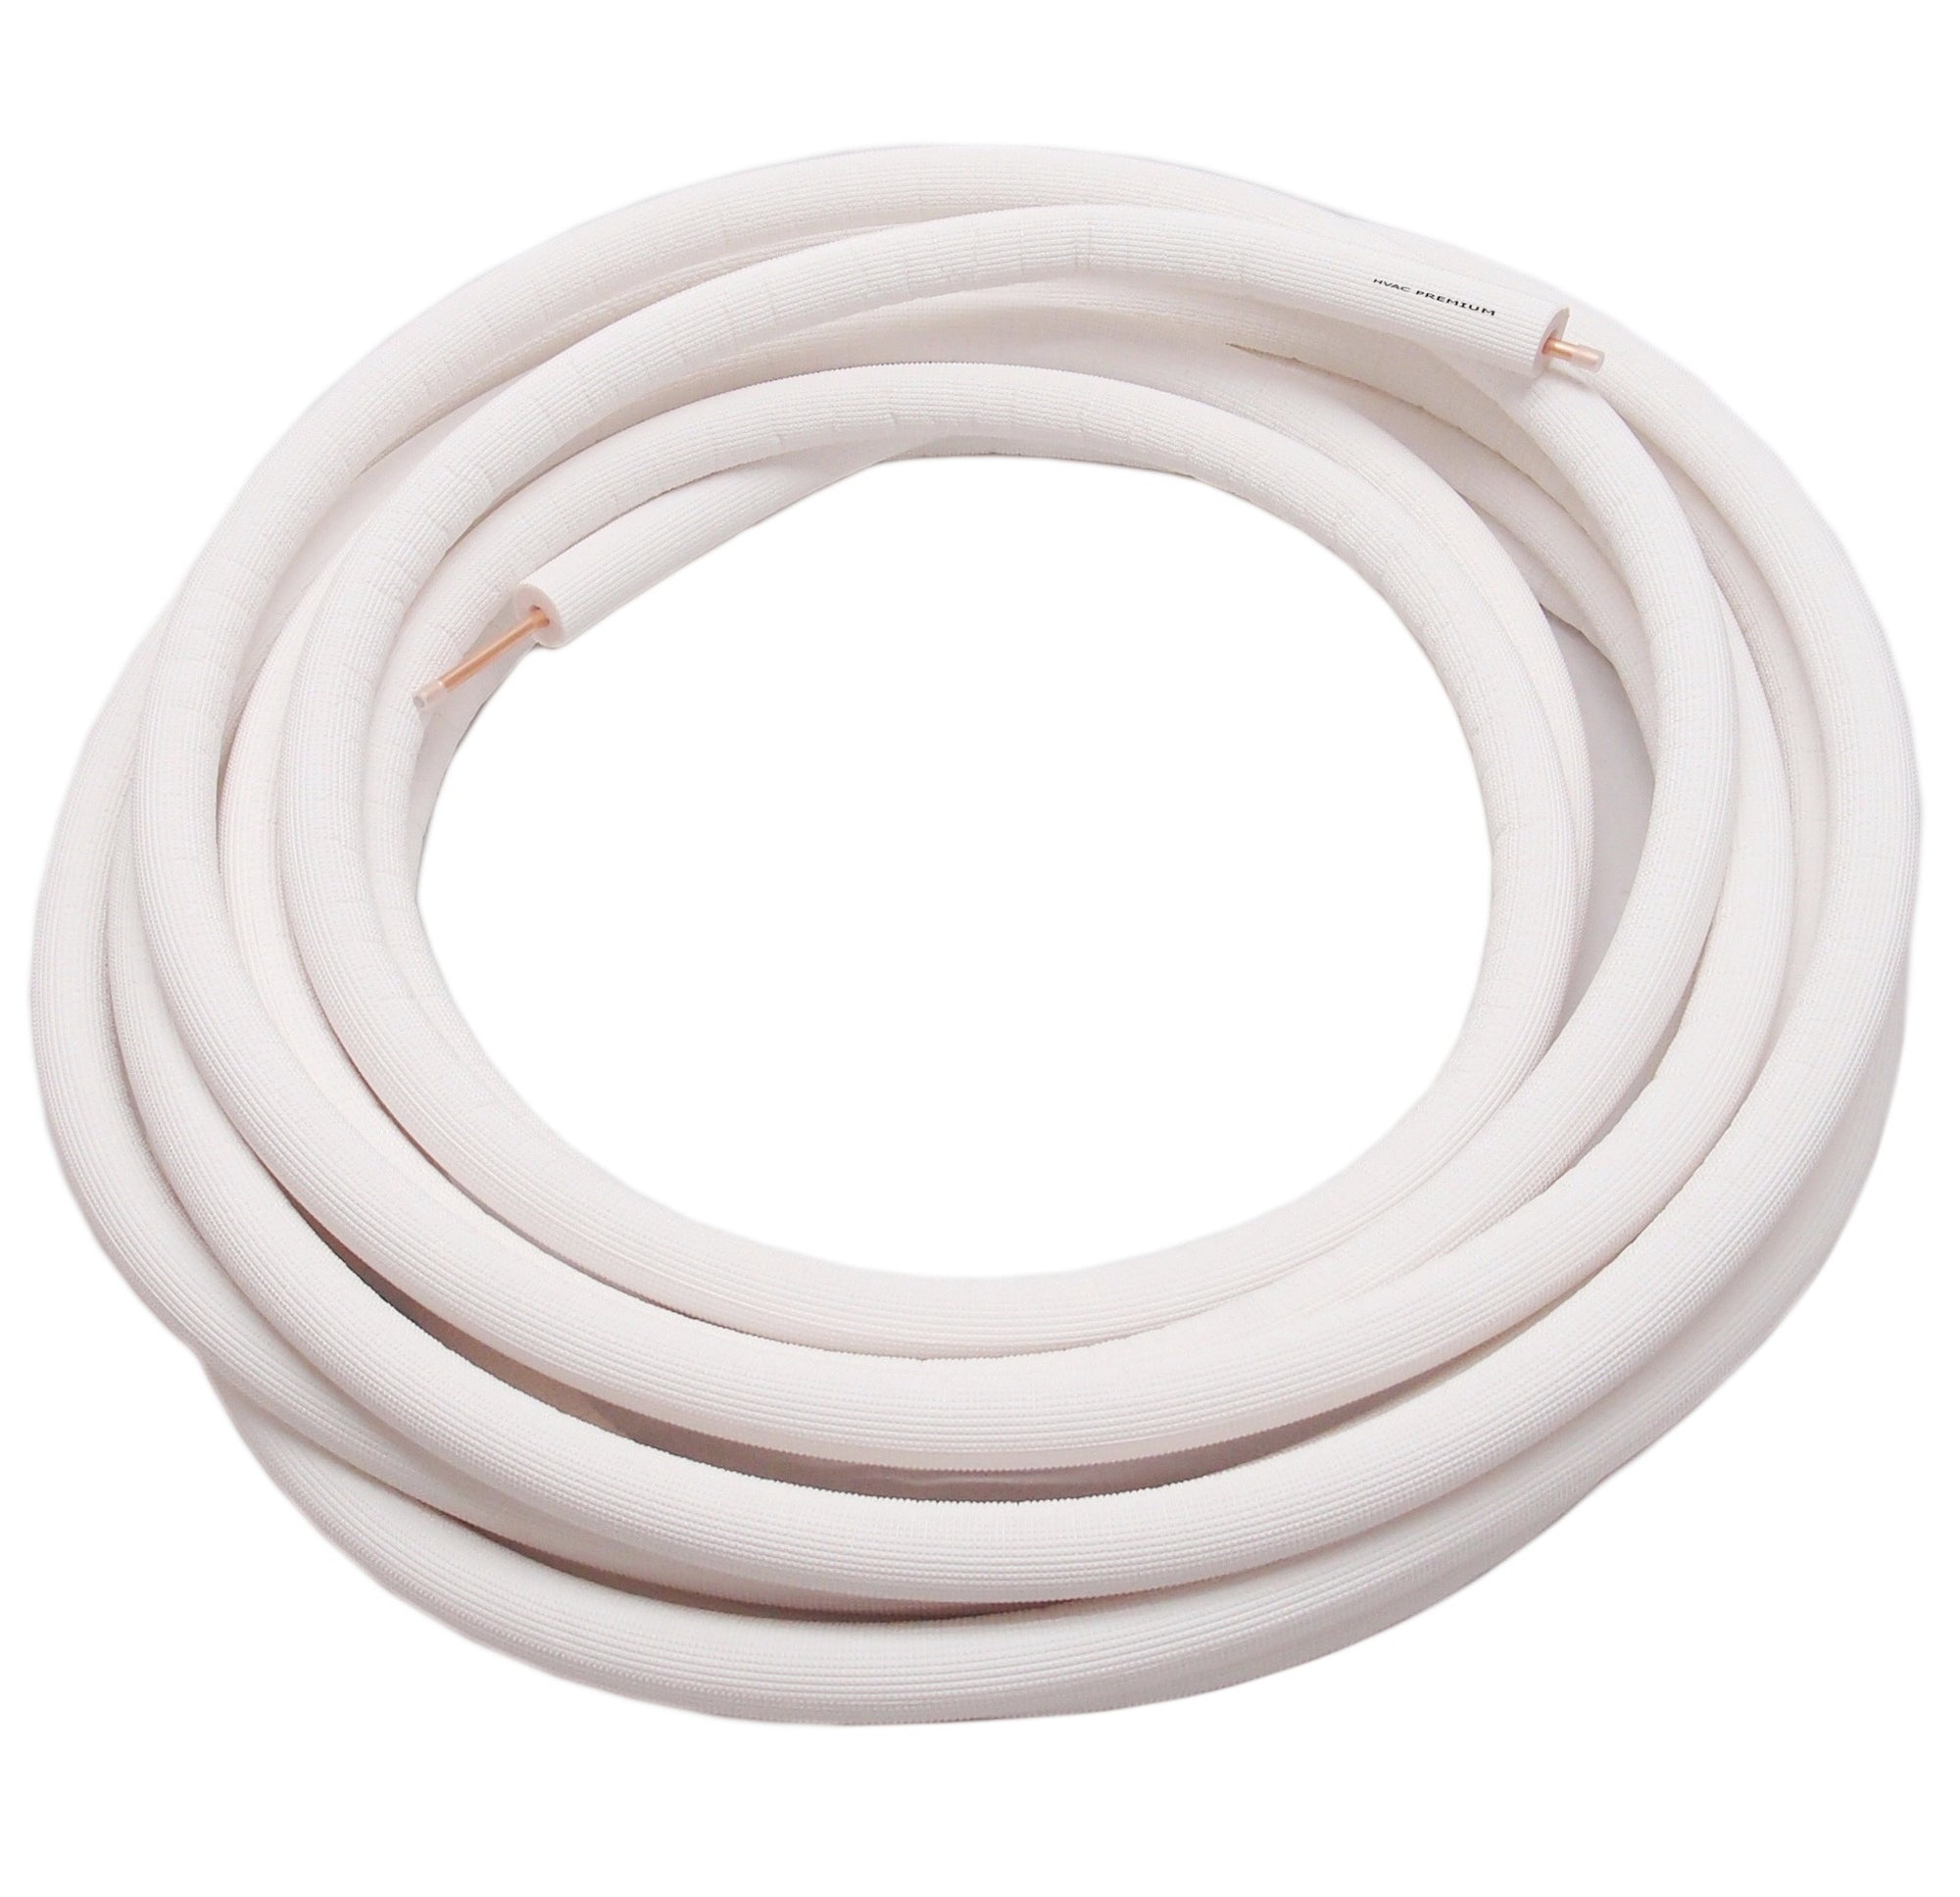 3/4" Insulated Copper Coil Line - Seamless Pipe Tube for HVAC, Refrigerant - 1/2" White Insulation - 50' Long